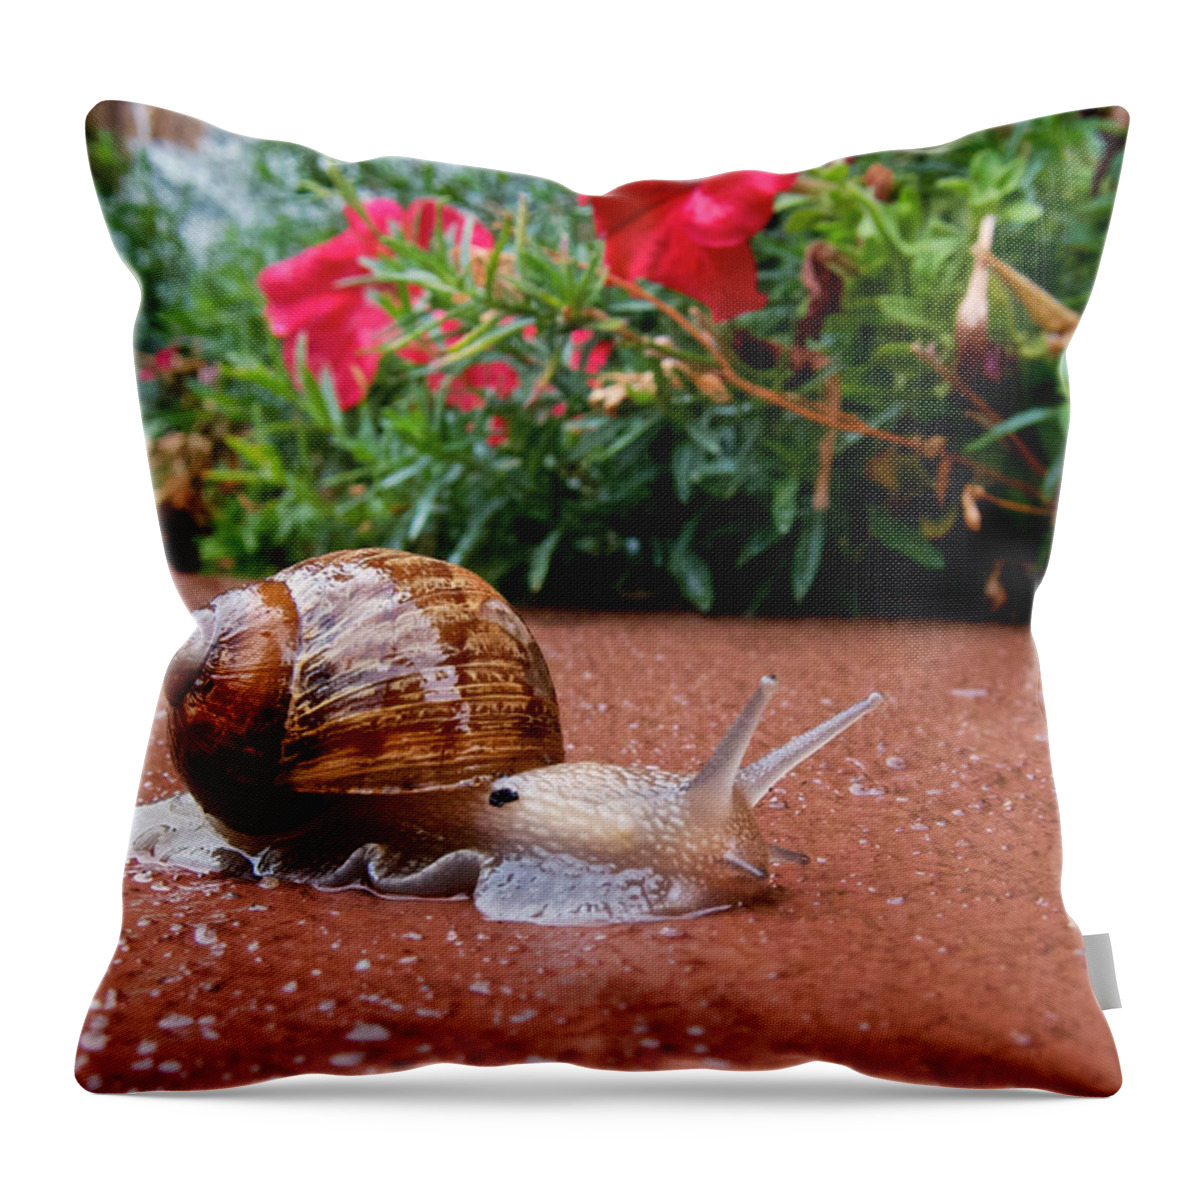 Rain Throw Pillow featuring the photograph Snail in Motion by Mary Lee Dereske